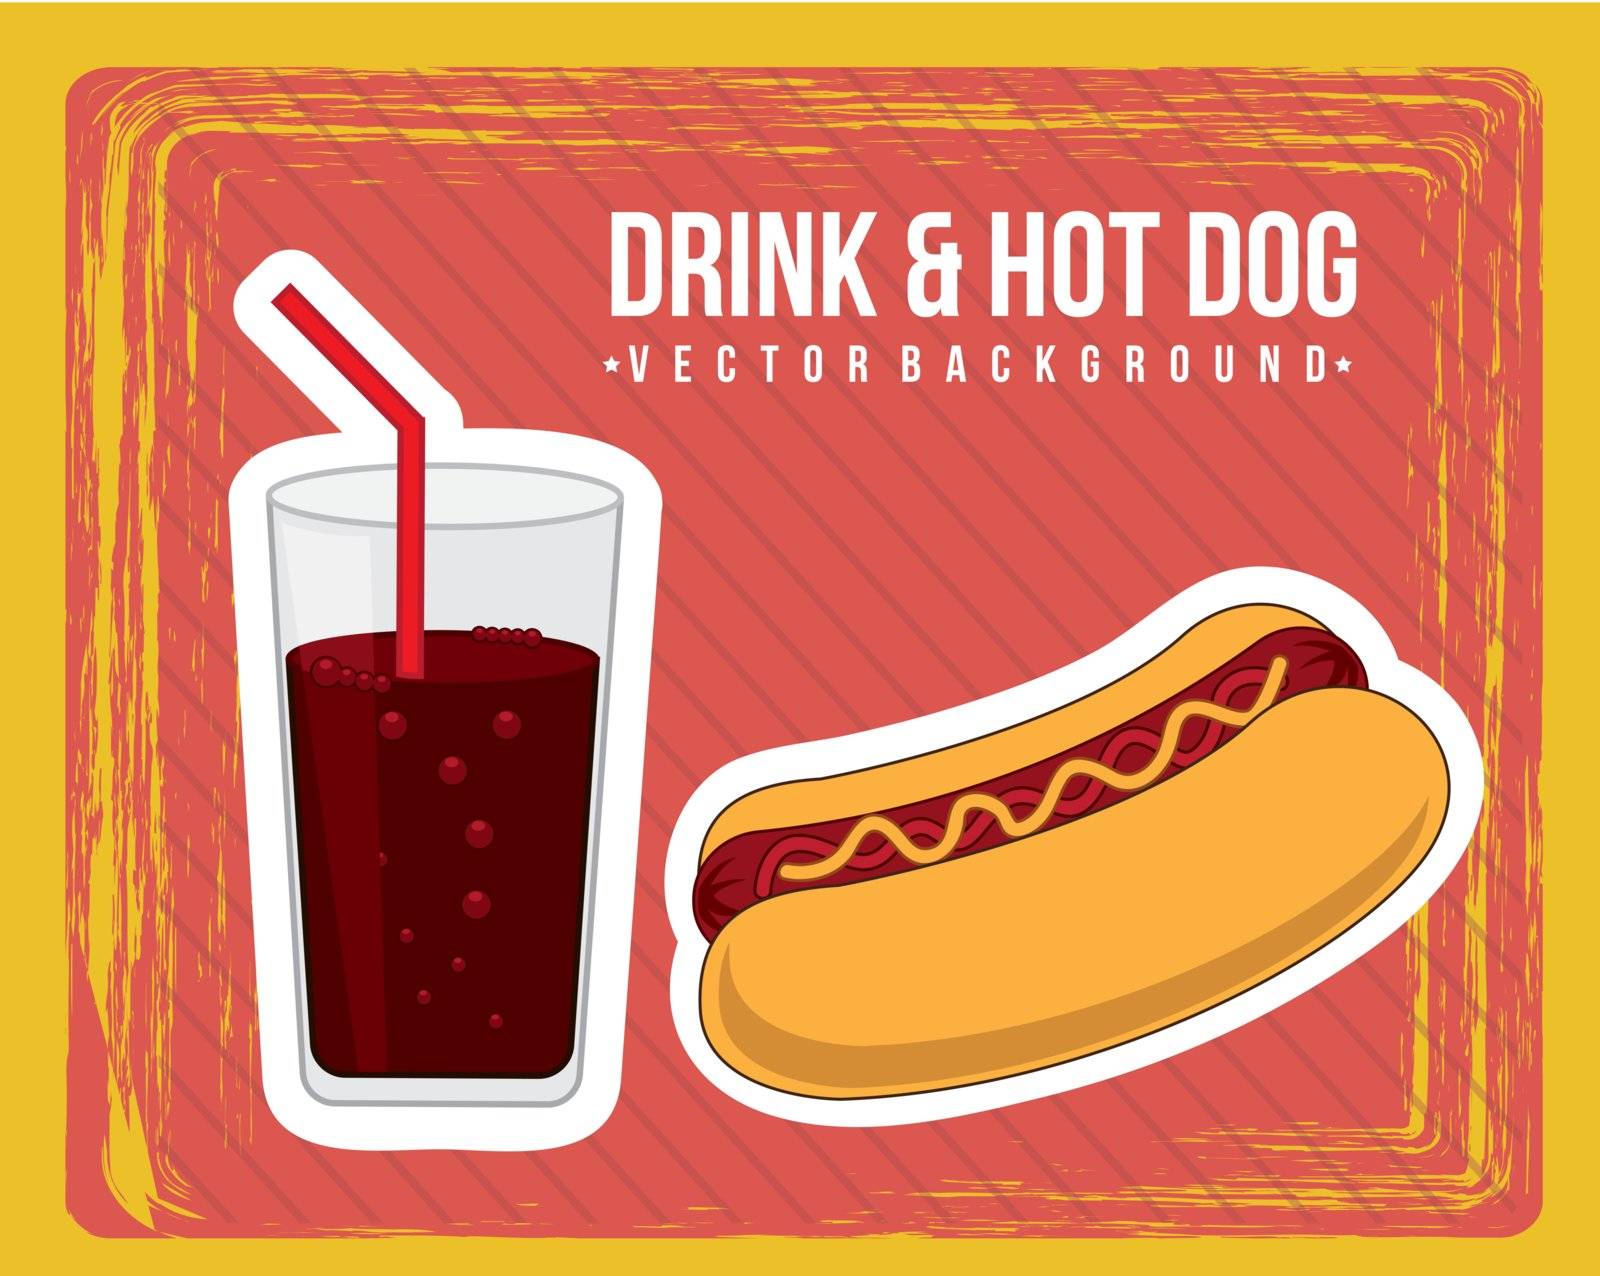 announcement of hot dog, vintage style. vector illustration